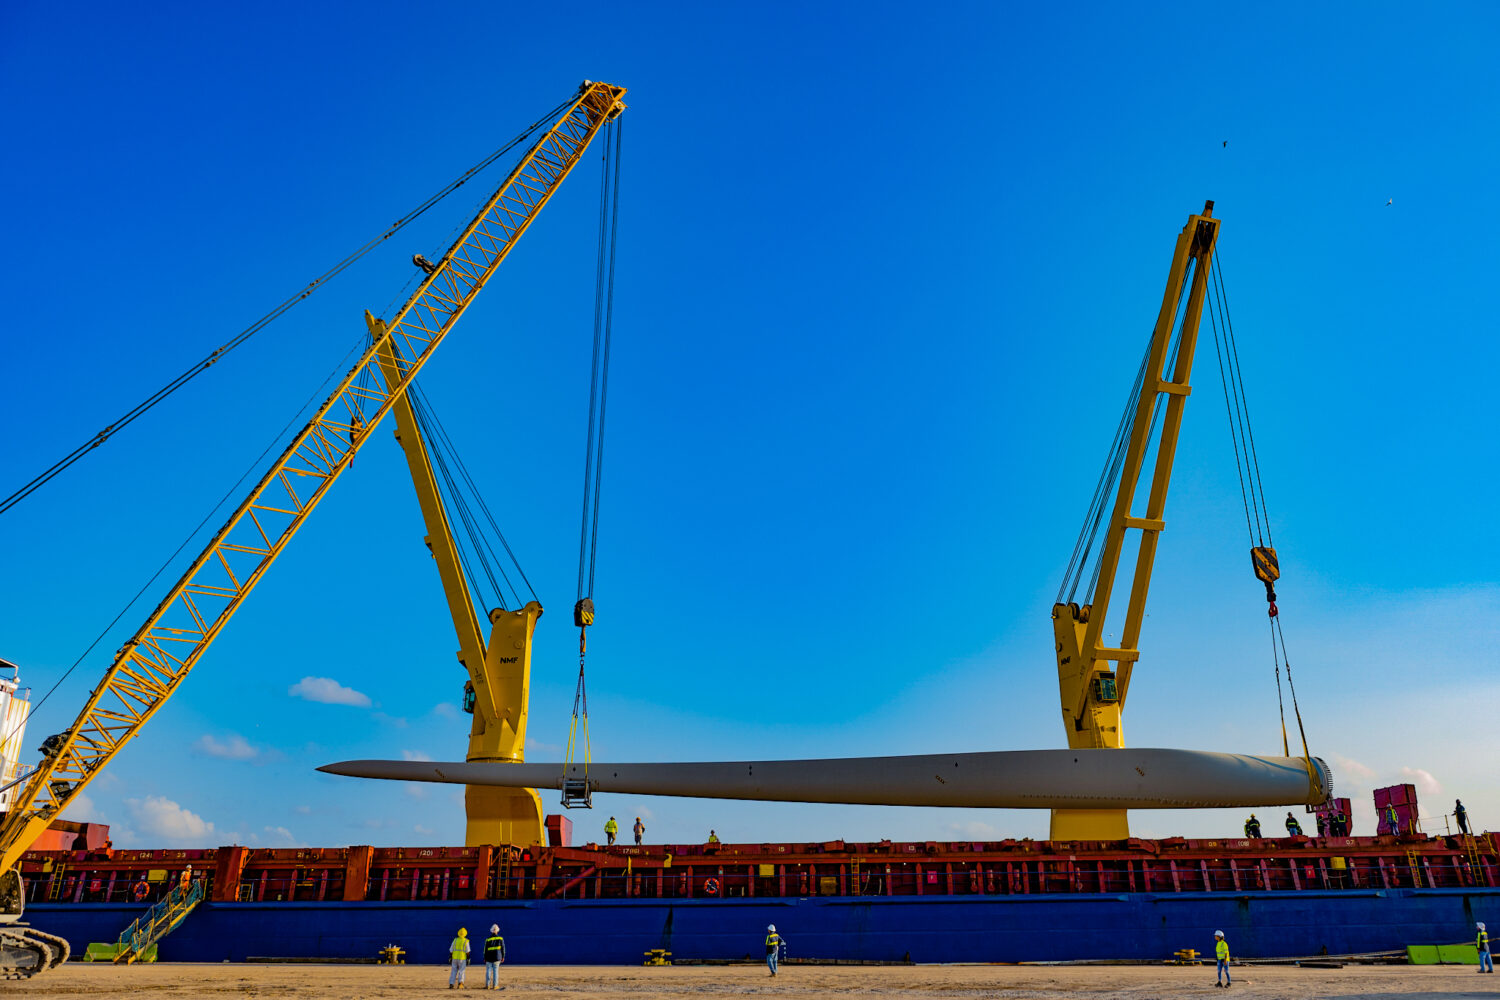 OIA helped a longtime client replace a massive wind turbine in Northeast Brazil, with the full cargo list including a wind turbine with 3 blades, a full tower set, one nacelle, and one hub. The project started at the Port of Houston before an ocean charter delivered the items for final handling at Suape Port in Brazil. 